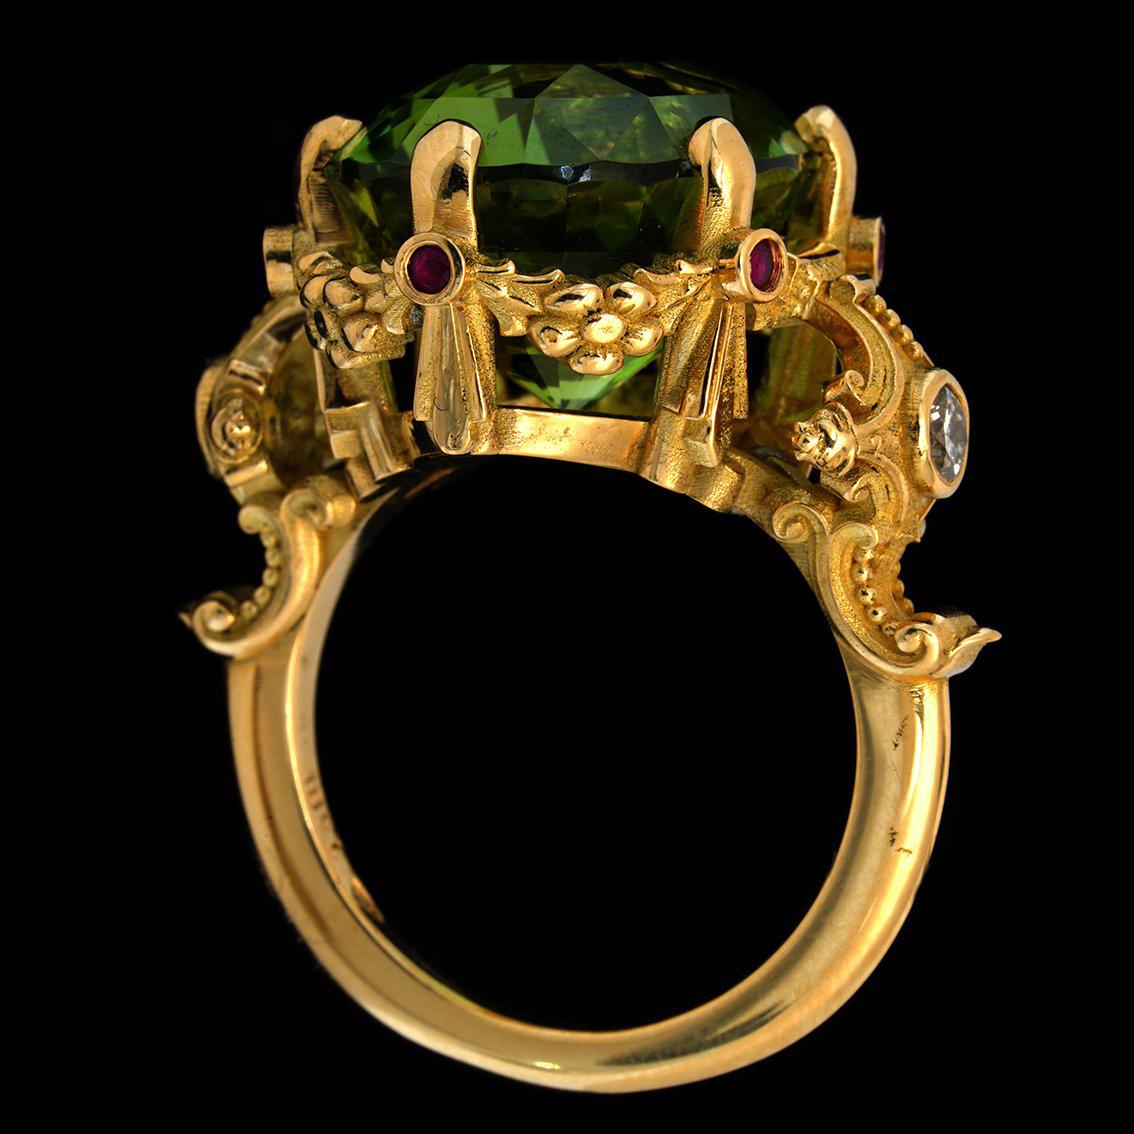 21ct Green Tourmaline, Rubies, Diamonds, & 18k Yellow Gold Antique Style Ring For Sale 5